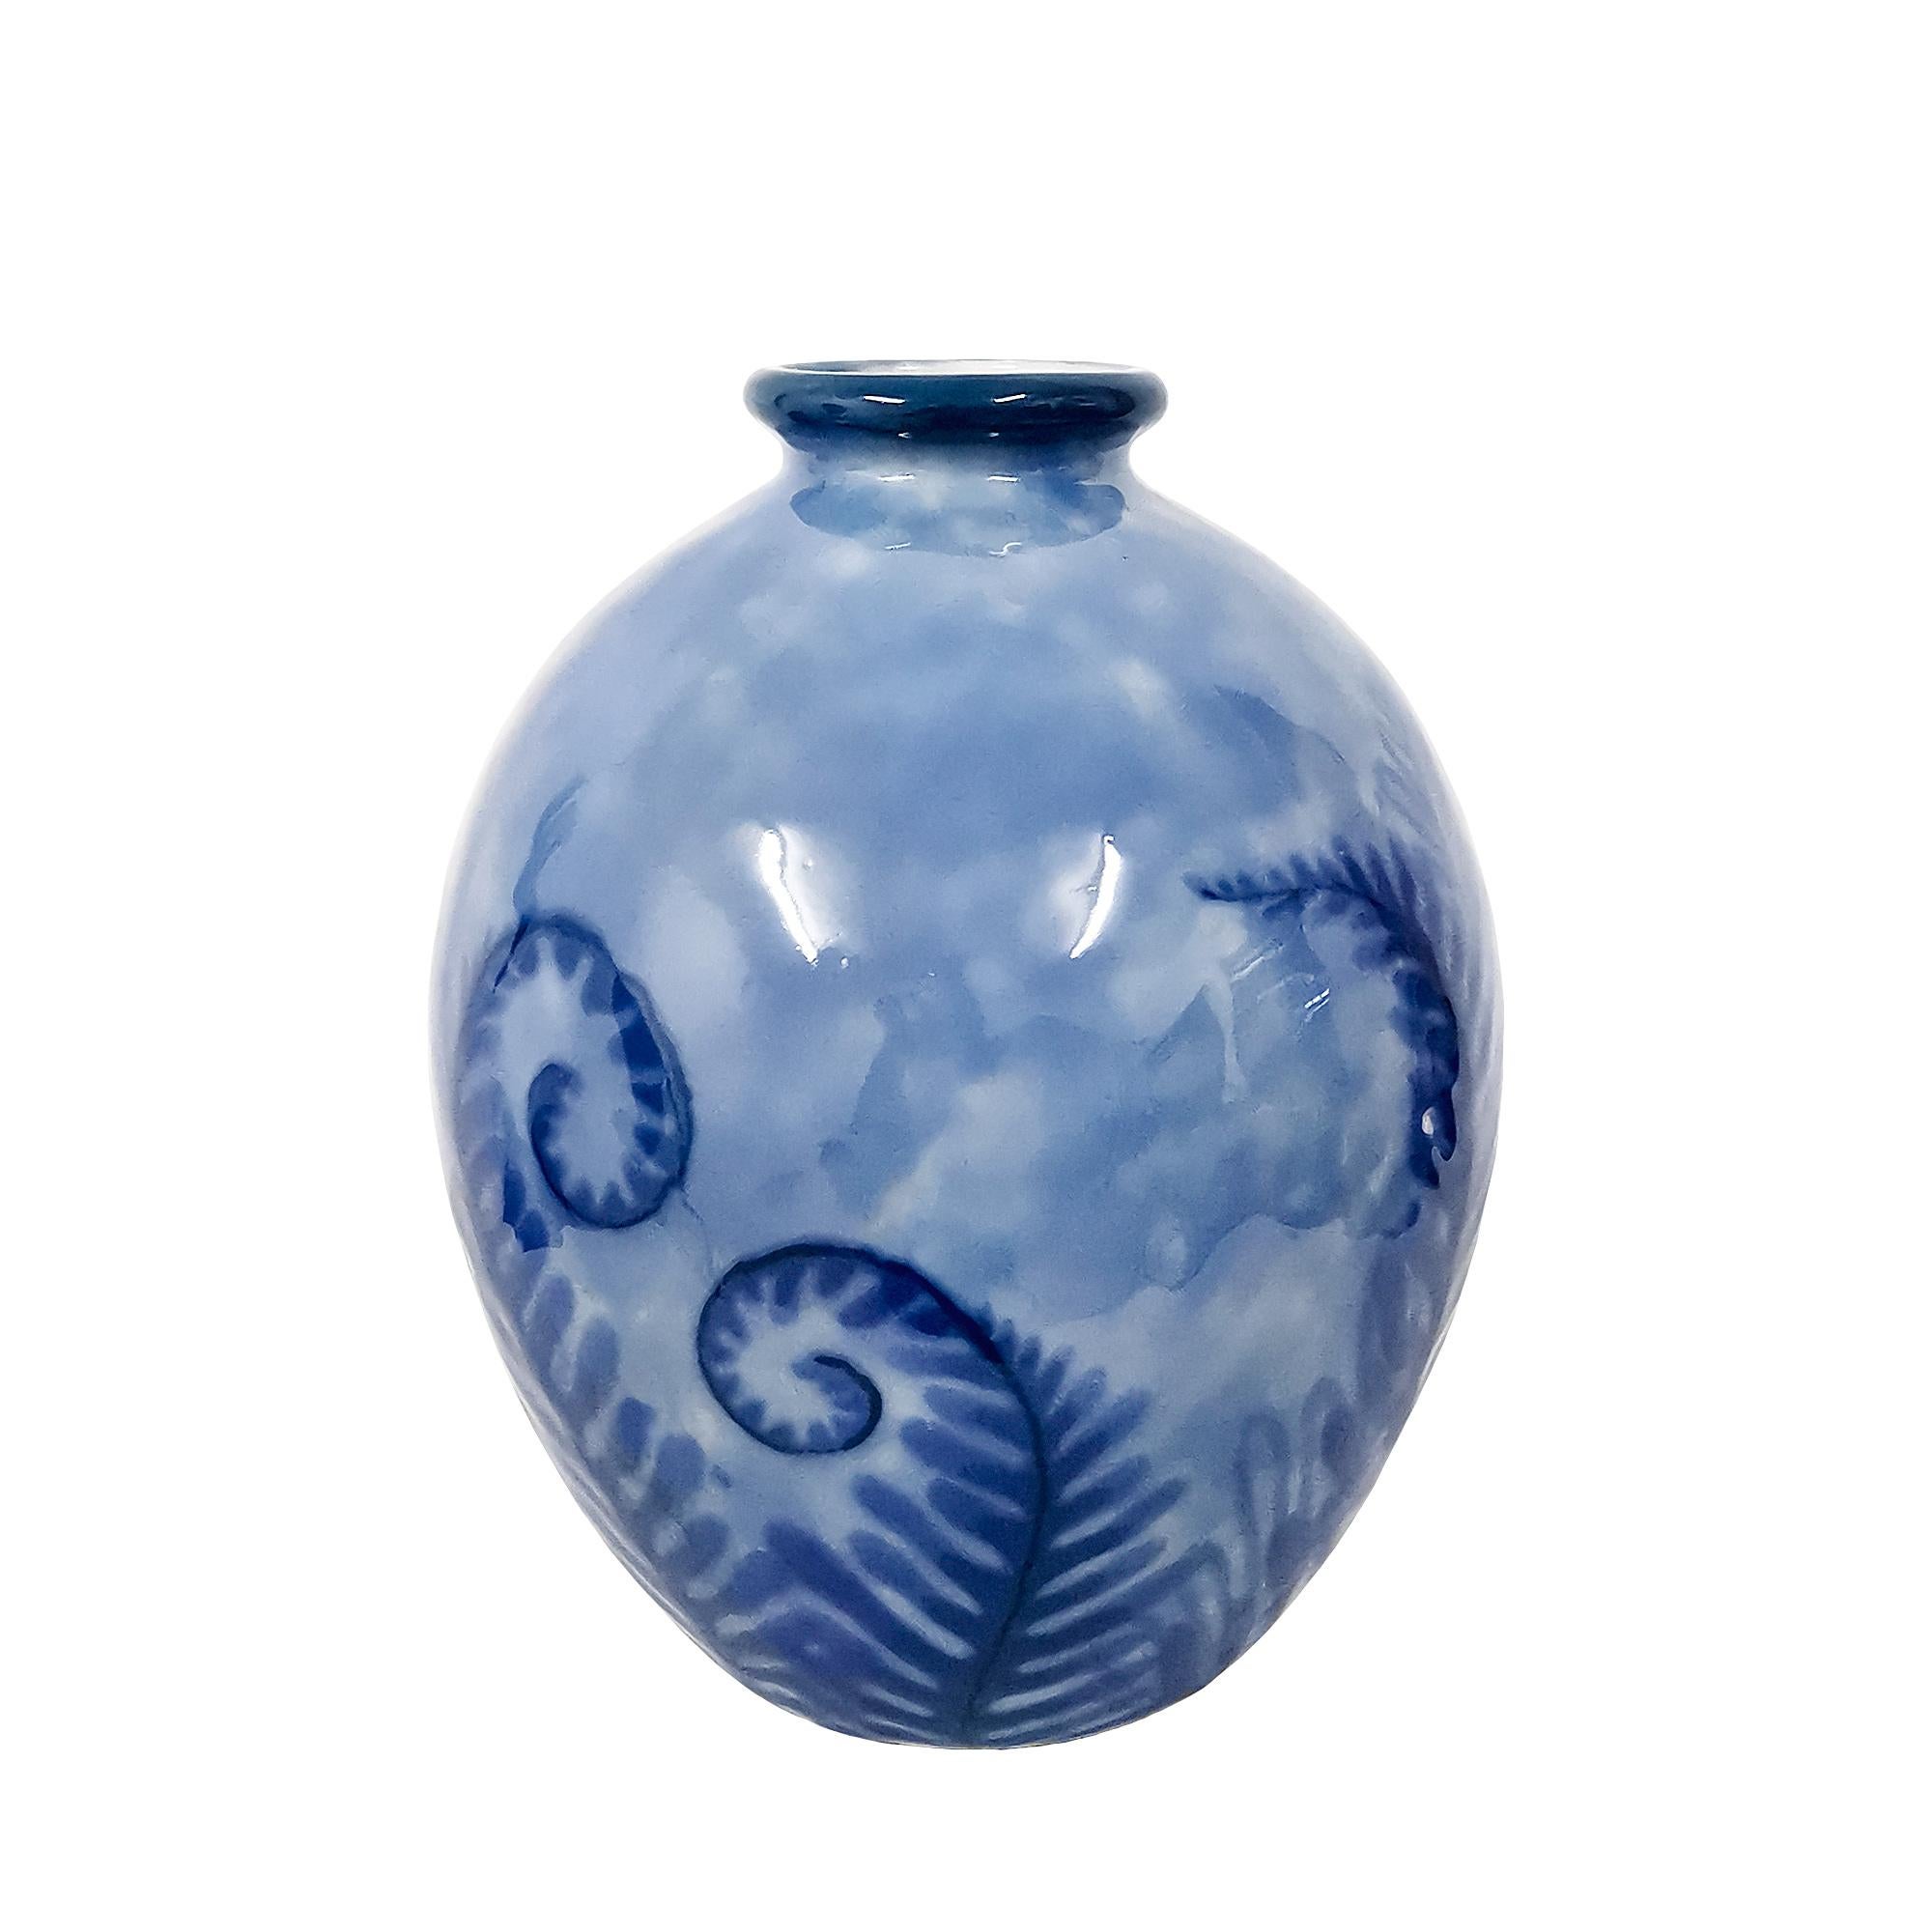 Large Limoges porcelain vase decorated with ferns in blue tones. Small firing defects.

Signed and stamped: Camille Tharaud.

Limoges, France circa 1930.